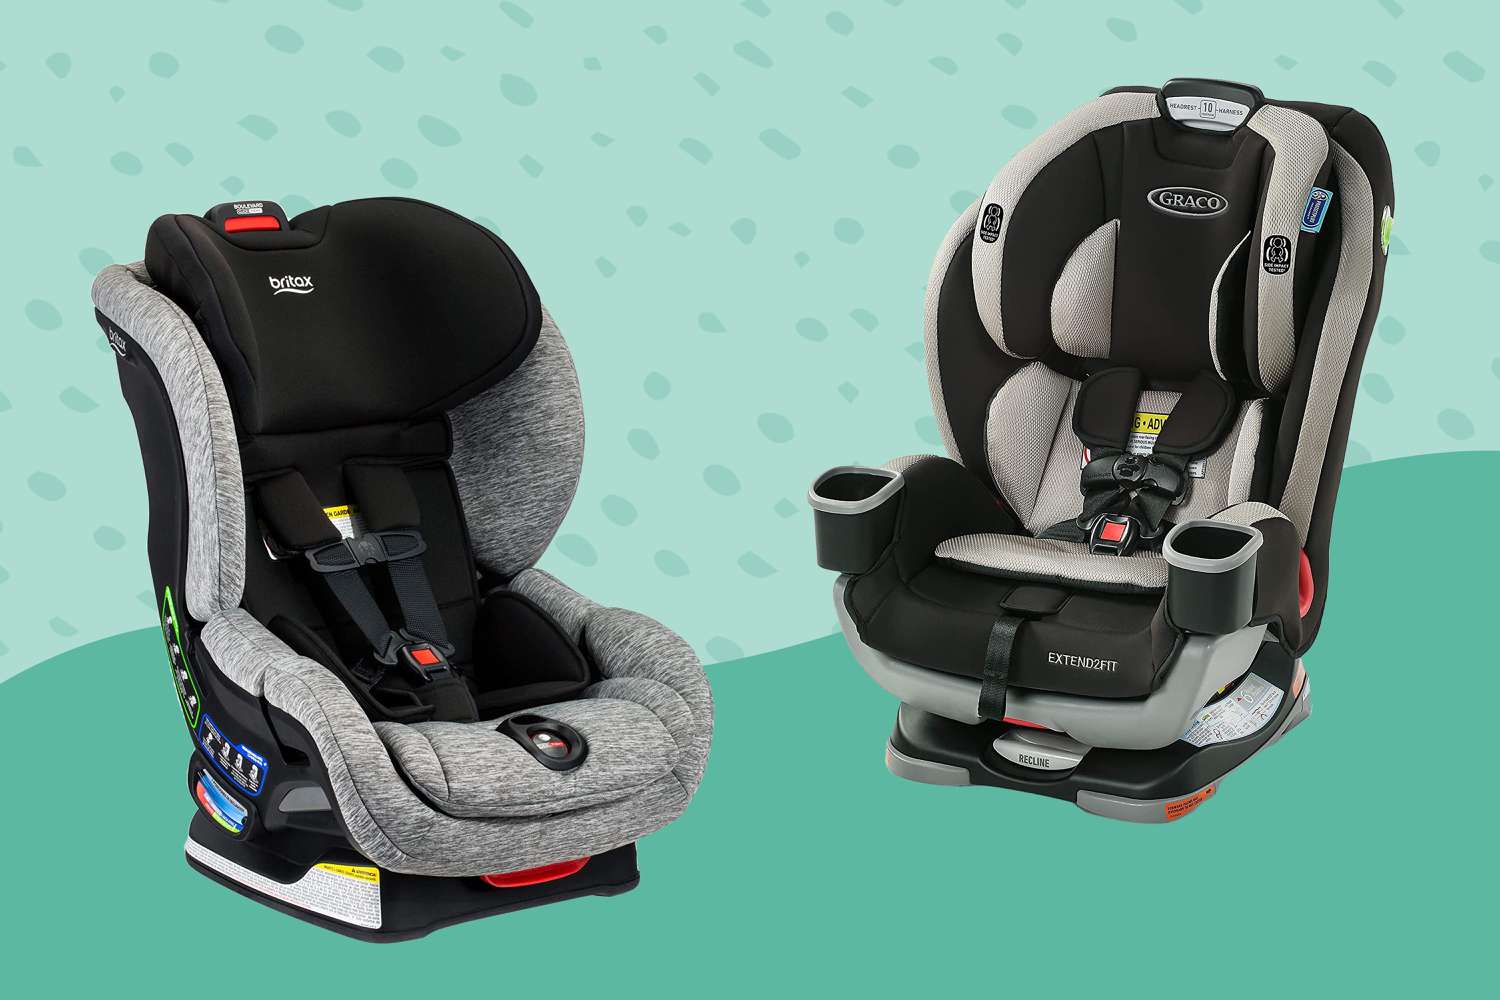 Convertible Car Seat Review: The Best Options for Safety and Comfort